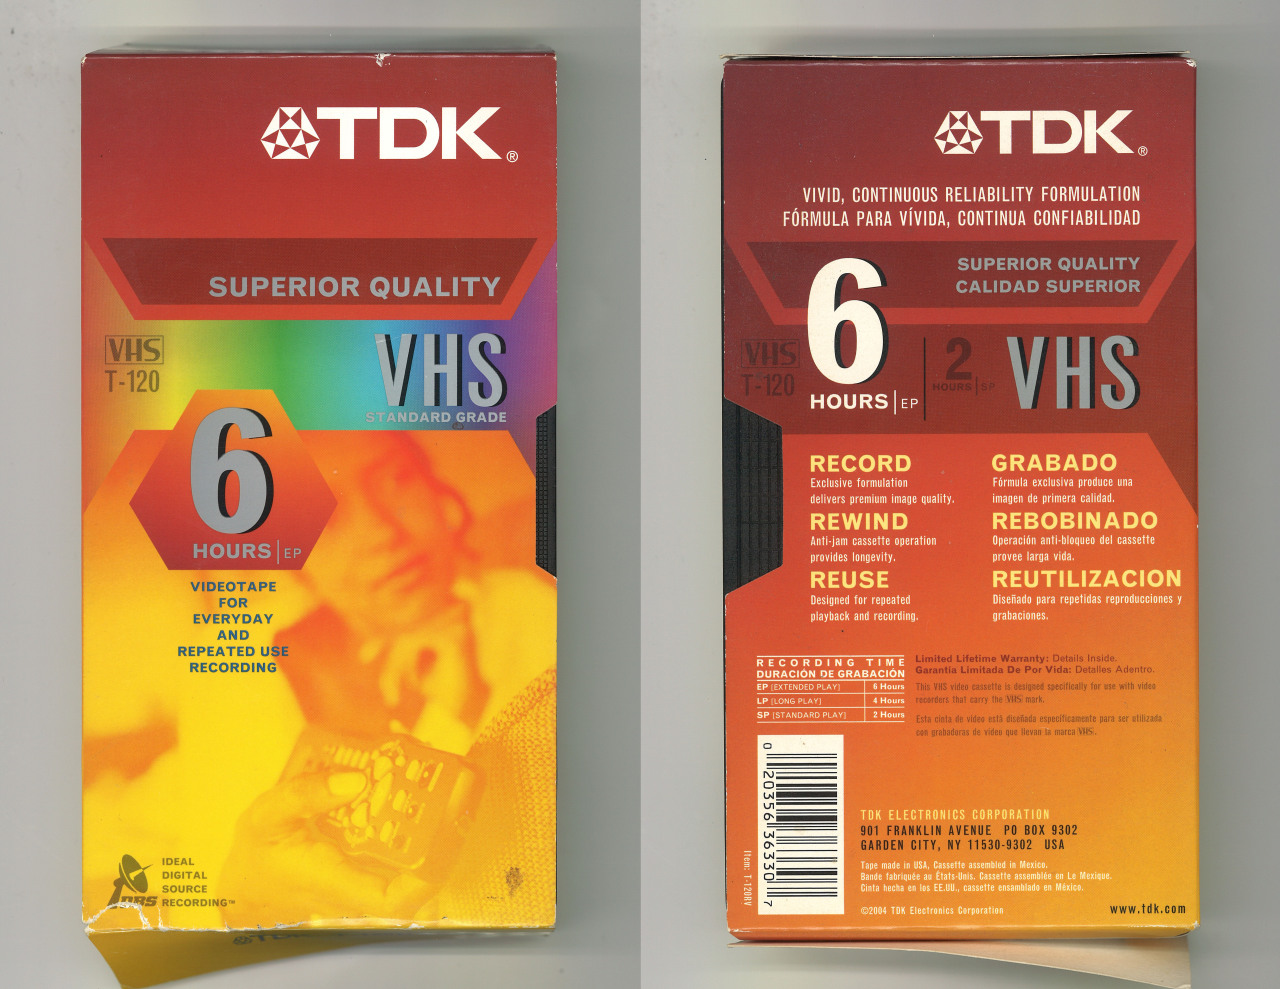 TDK SUPERIOR QUALITY VHS VIDEO CASSETTE T-120 TAPE “Ideal Digital Source Recording”